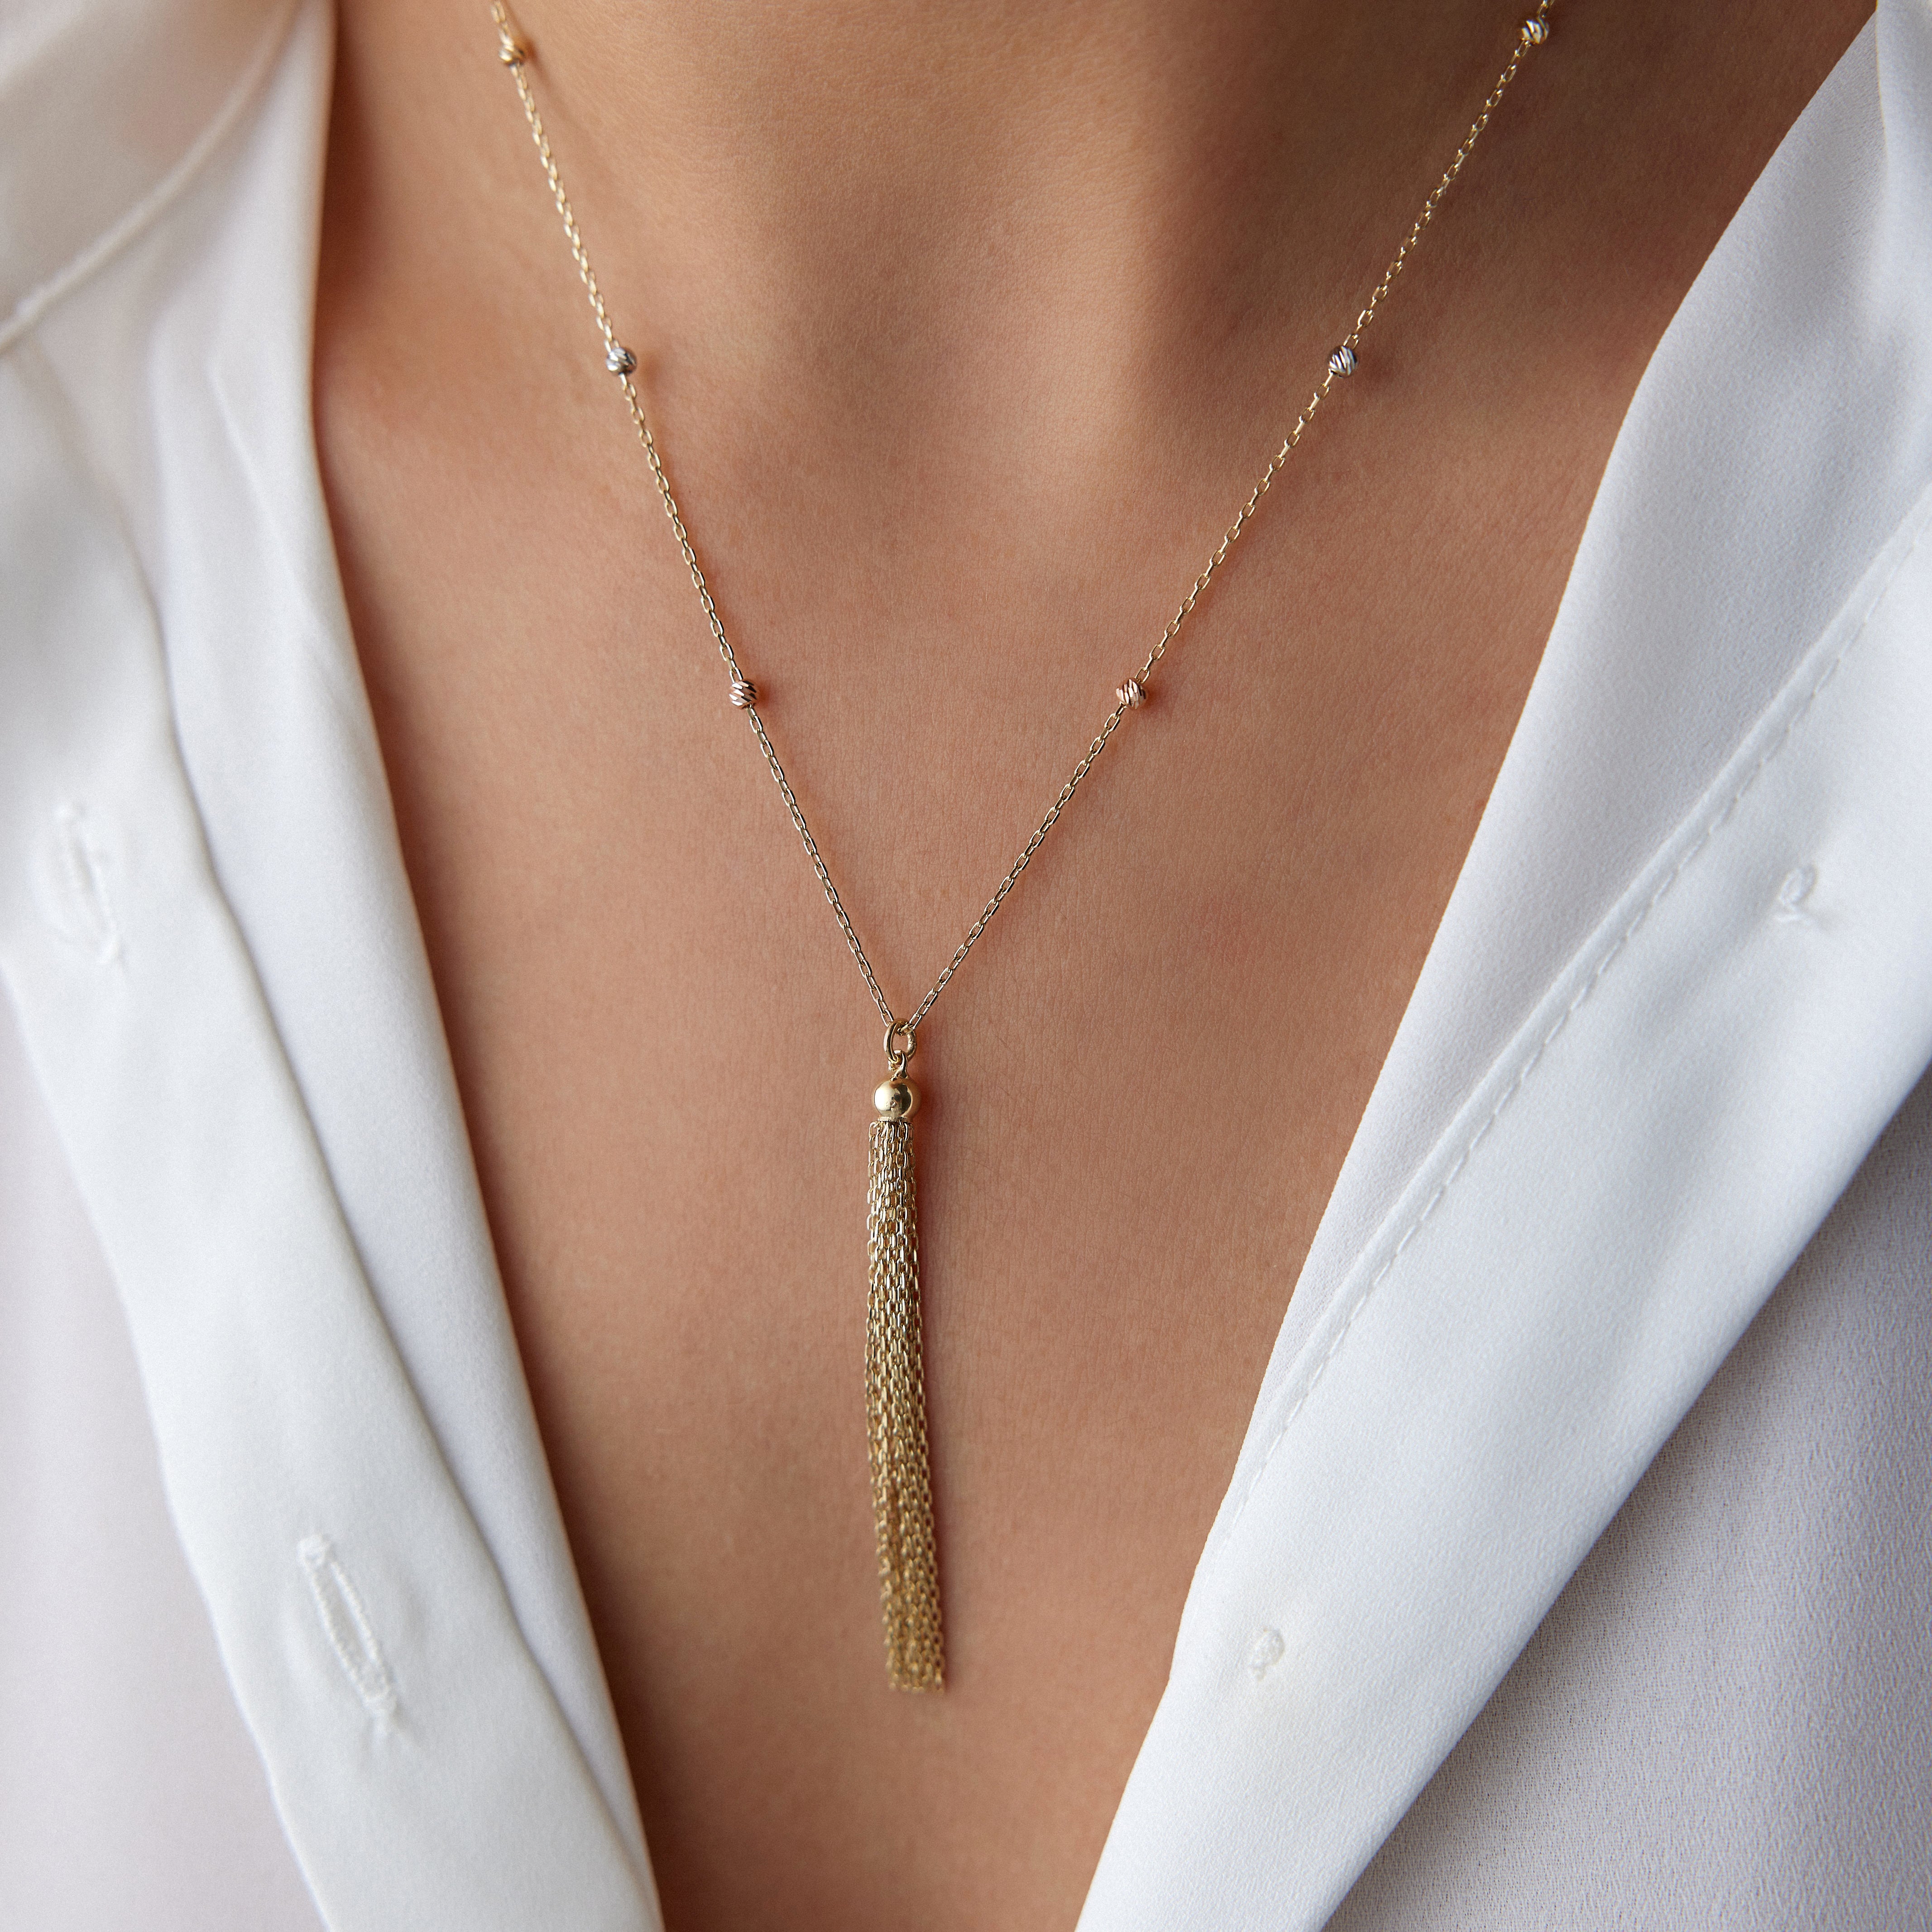 Gold Chain Tassel Necklace in 14K Gold